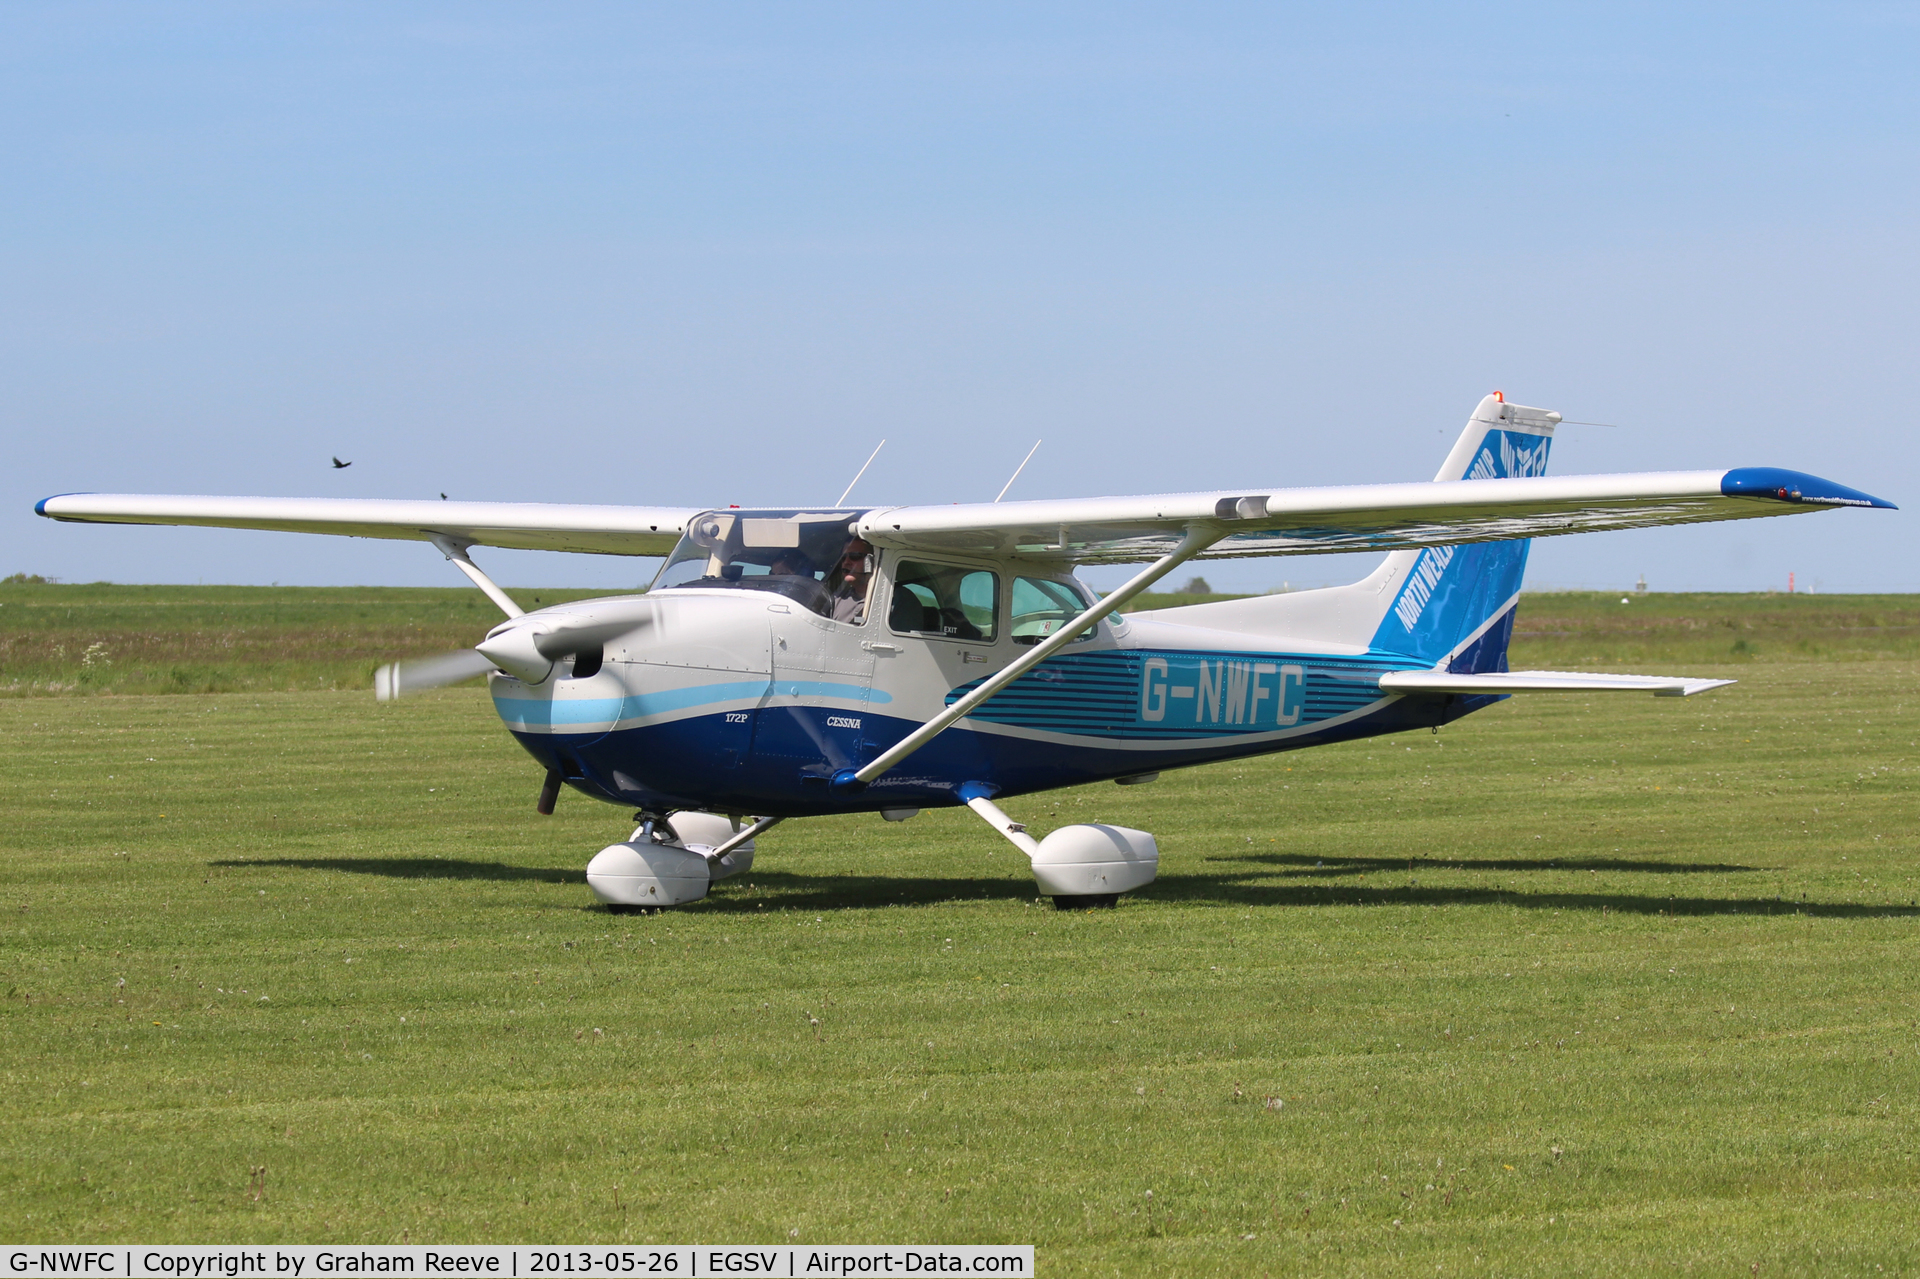 G-NWFC, 1985 Cessna 172P C/N 172-76305, About to depart from Old Buckenham.